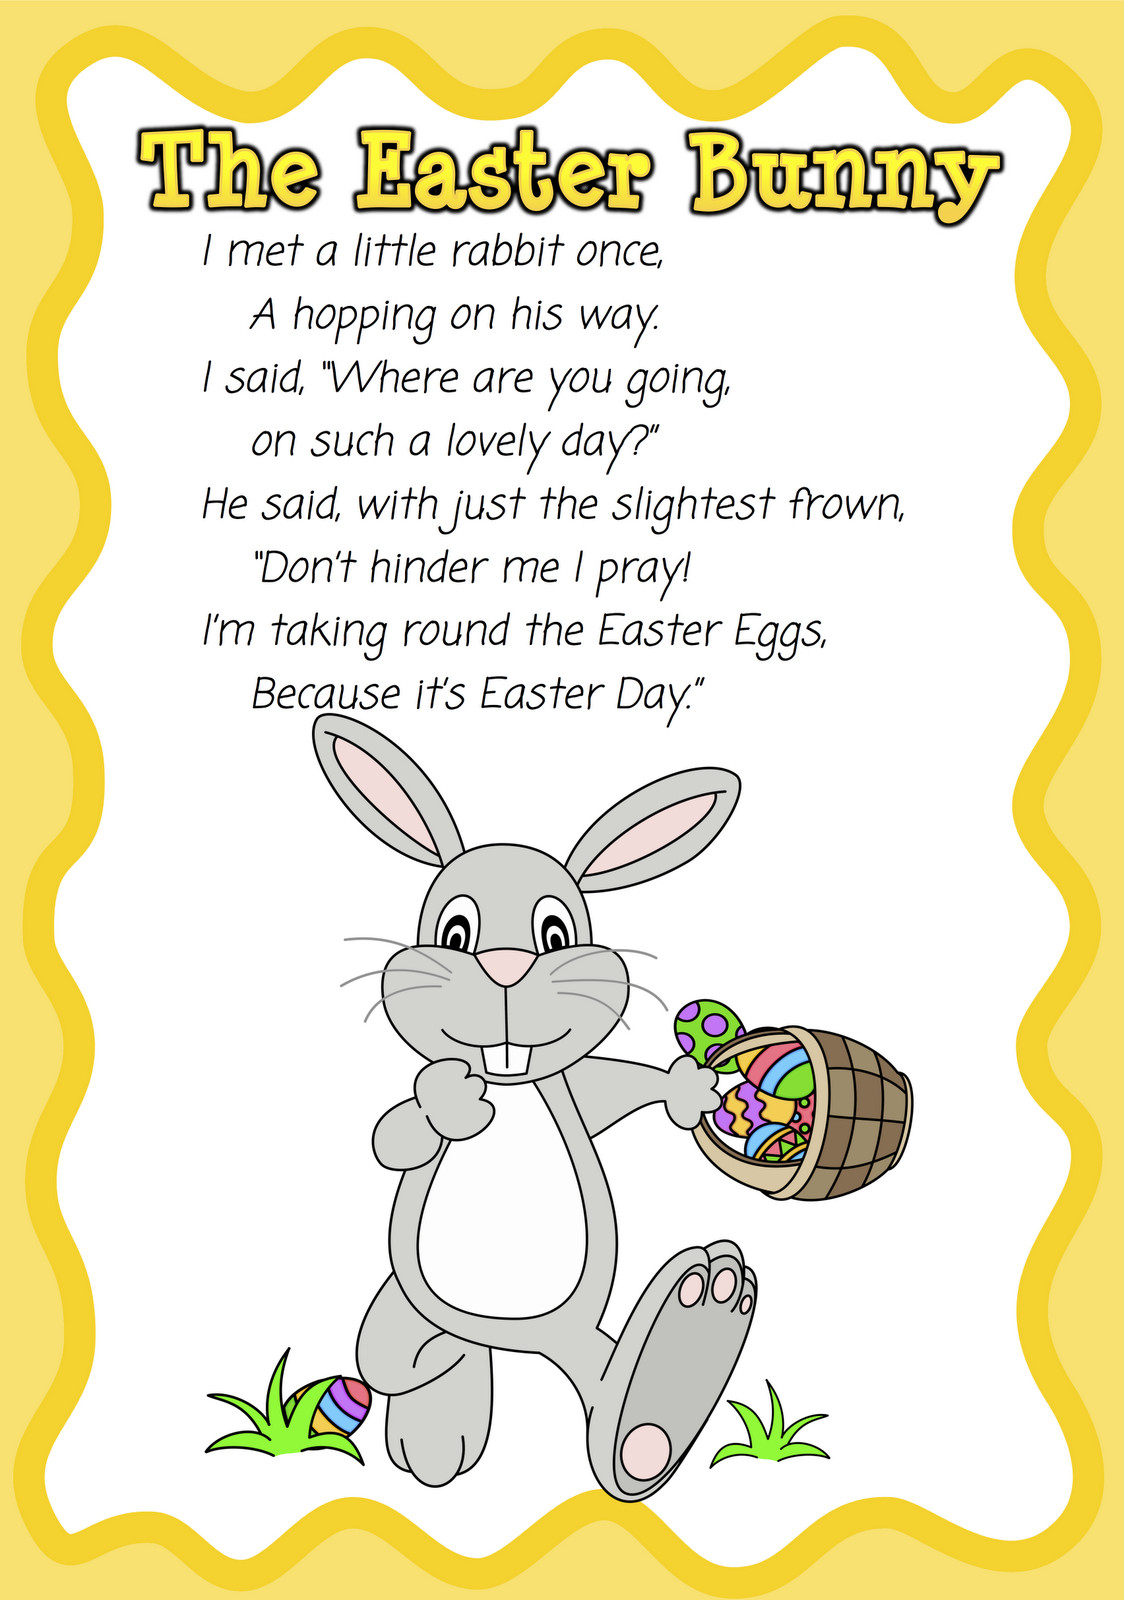 Easter Quotes For Kids
 Image detail for hope your children enjoy this poem